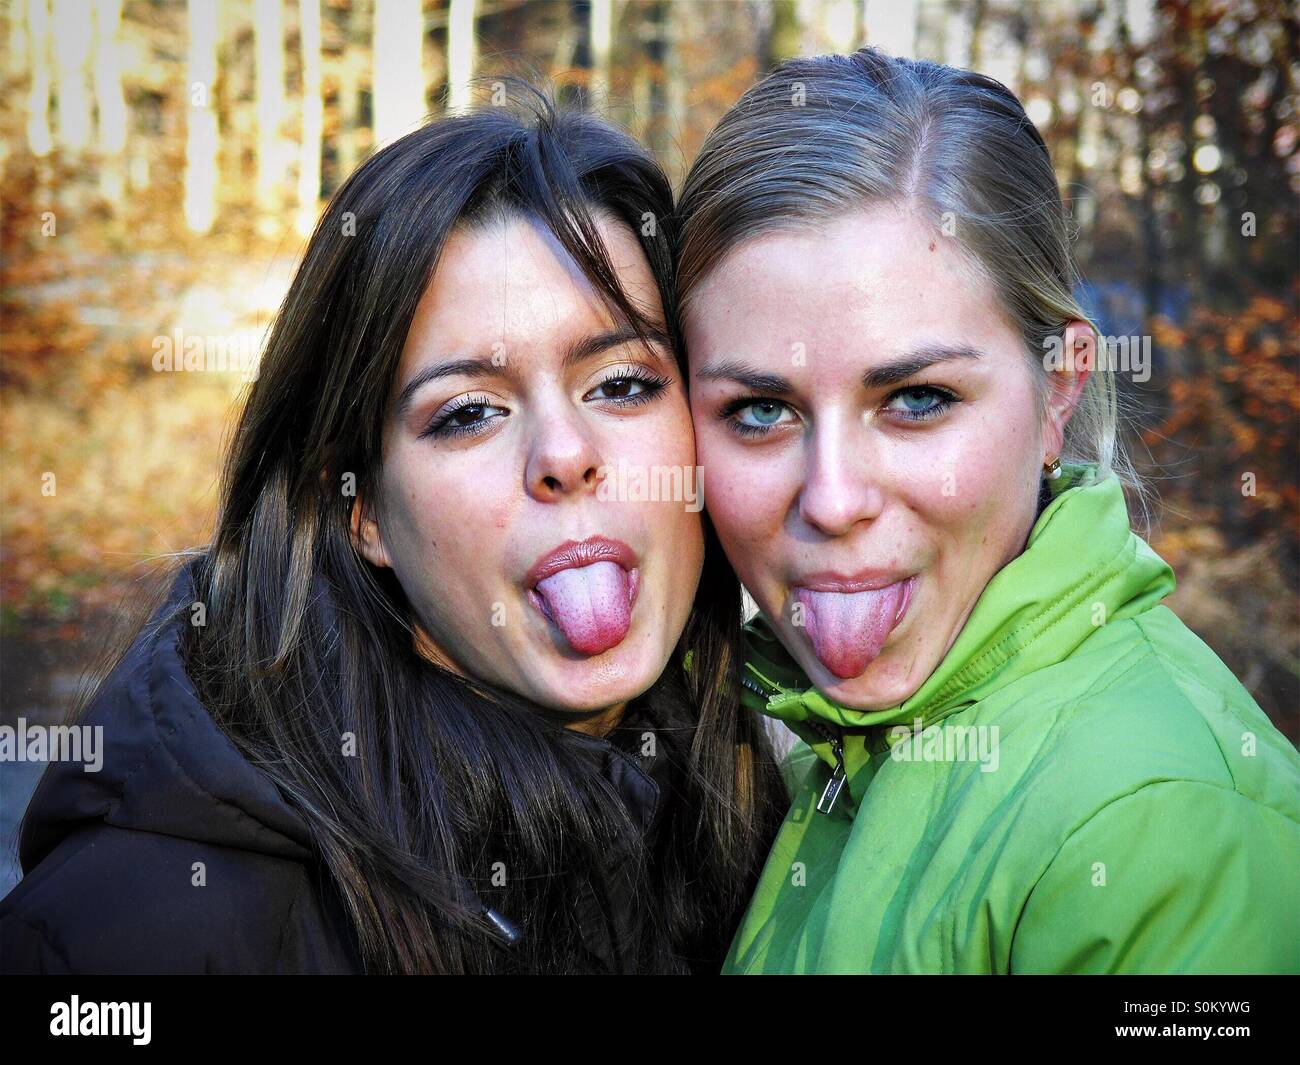 Two girls sticking tongue out Stock Photo